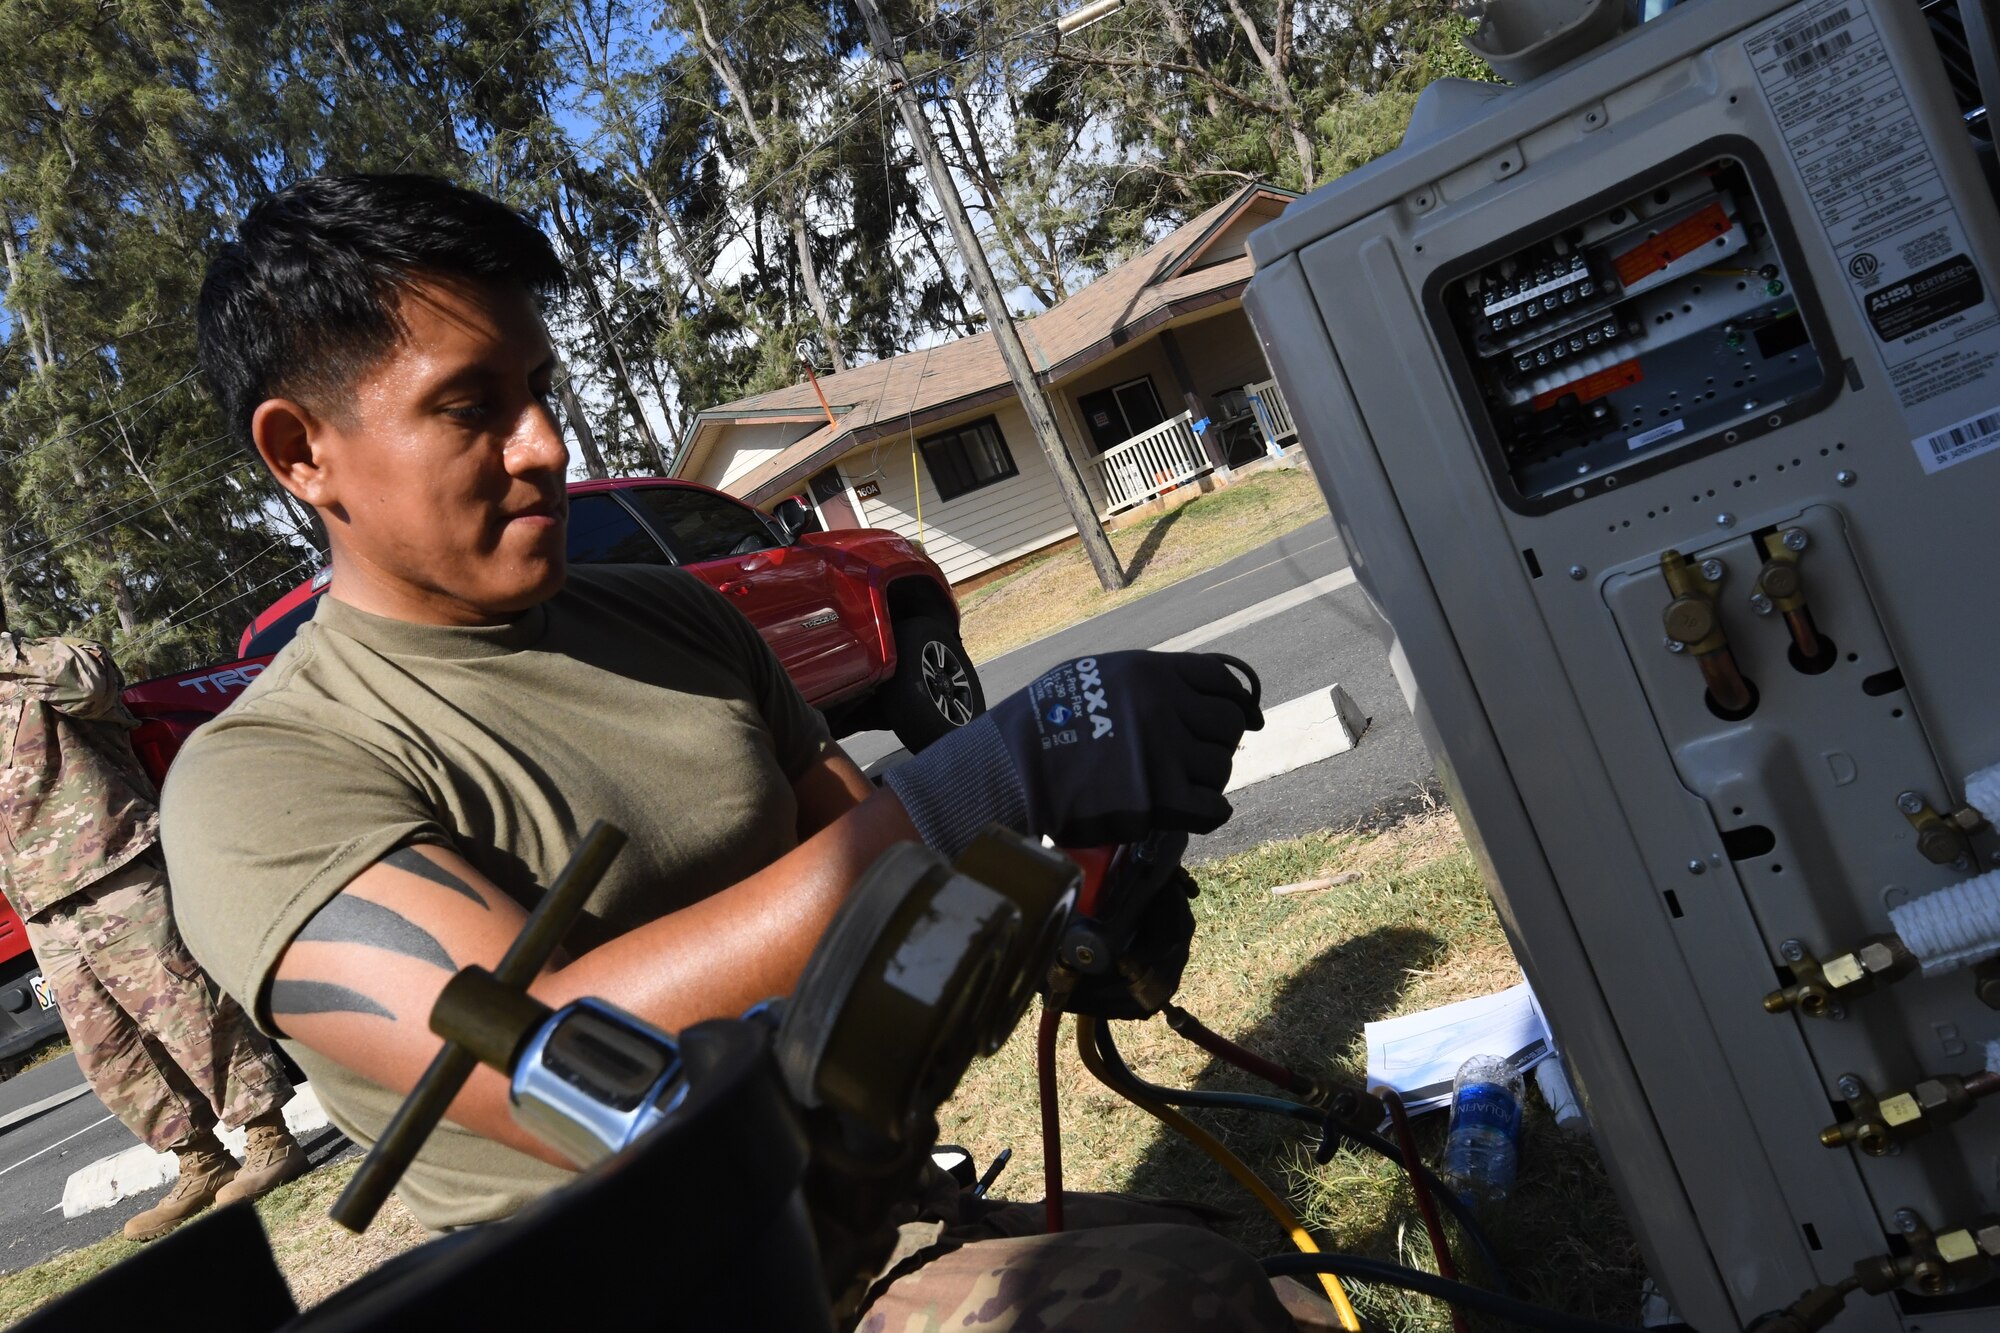 A photo of U.S. Air Force Tech. Sergeant Andre Chamilco, 624th Civil Engineer Squadron Heating Ventilation and Air Conditioning, repairing a local unit for facility repairs at Bellows Air Force Station, Hawaii, July 22, 2020, during the unit’s Annual Training. The U.S. Air Force Reserve’s 624th CES provided necessary repairs at Bellows AFS, a Military Welfare and Recreation facility that supports military families and communities, to improve infrastructure and increase individual readiness skills. (U.S. Air Force photo by Tech. Sgt. Garrett Cole)